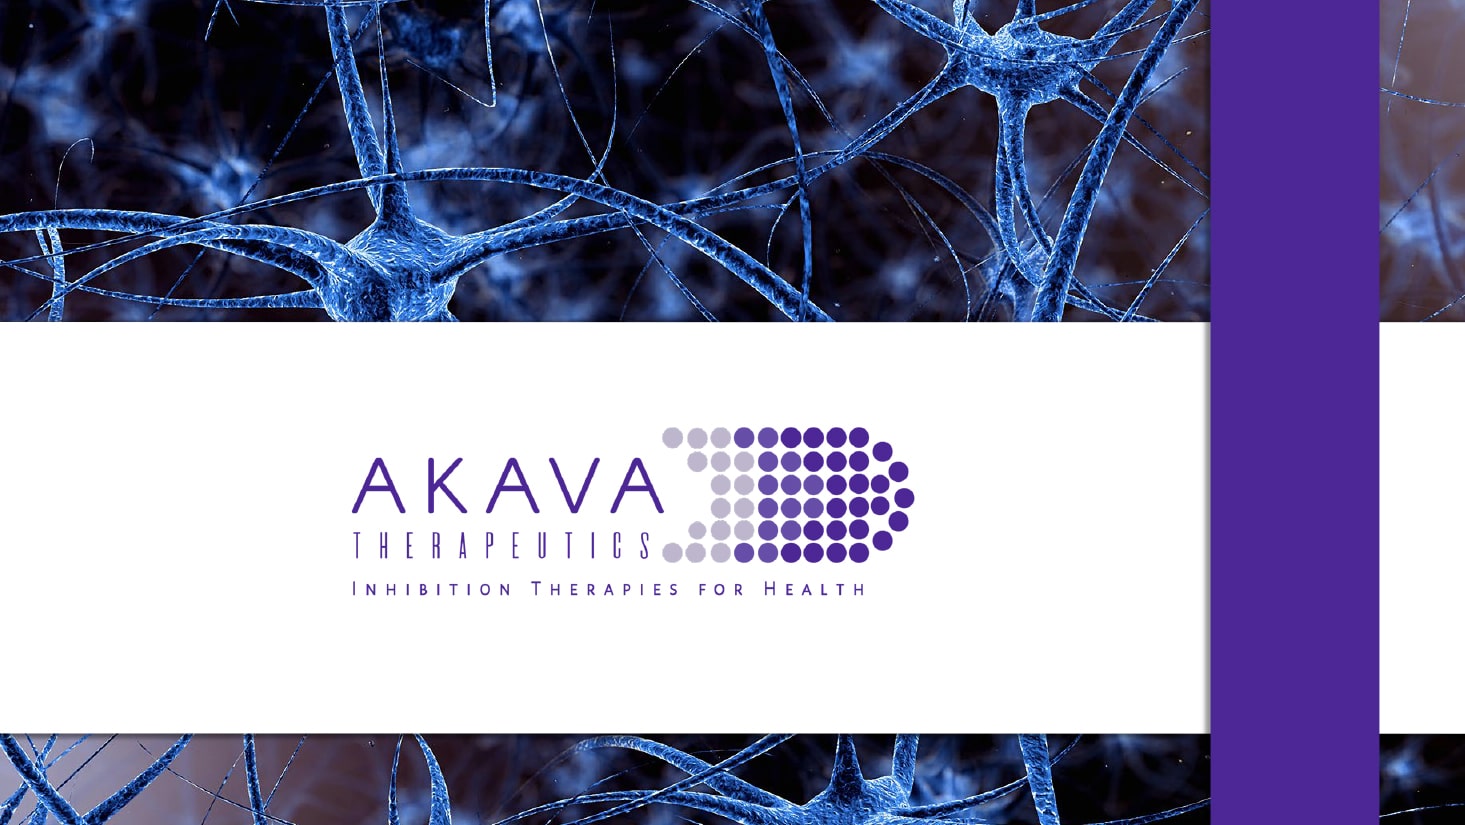 Akava biotech website image for powerpoint graphic image for portfolio